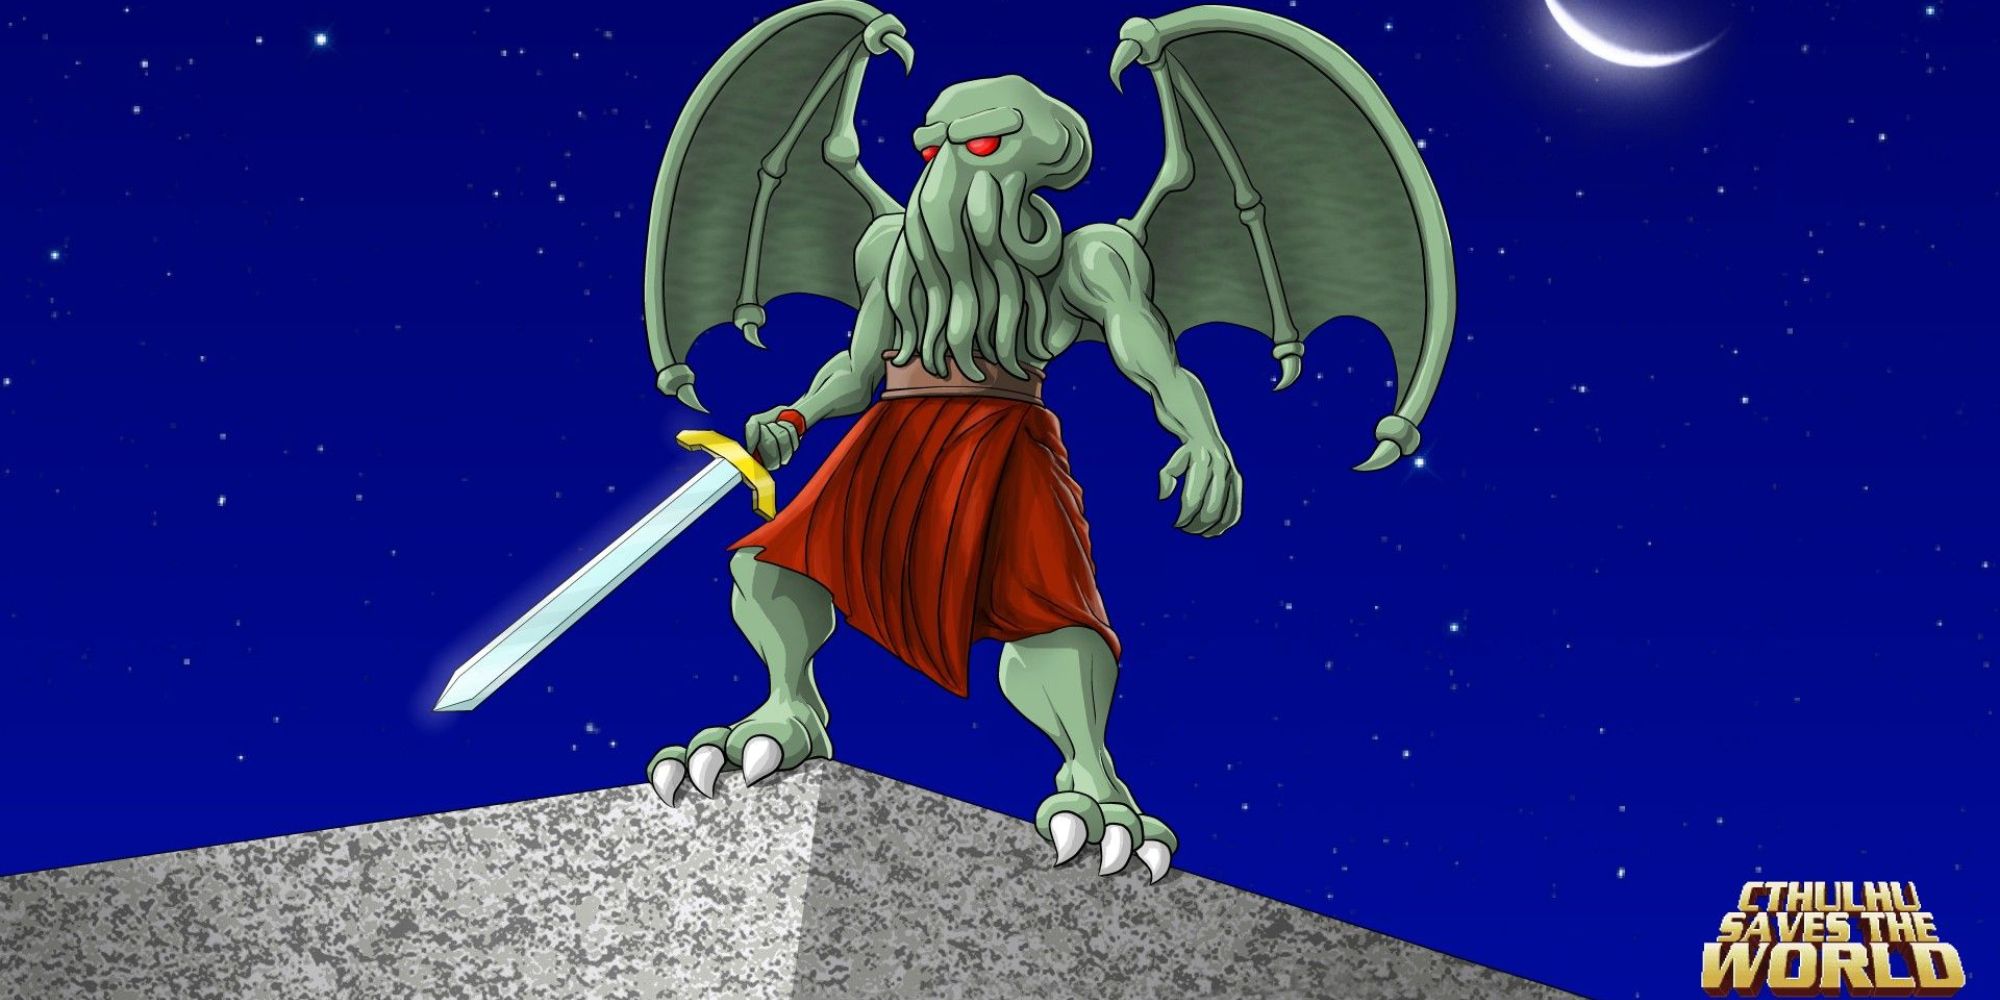 Cthulhu saves the world cthulhu stands with sword